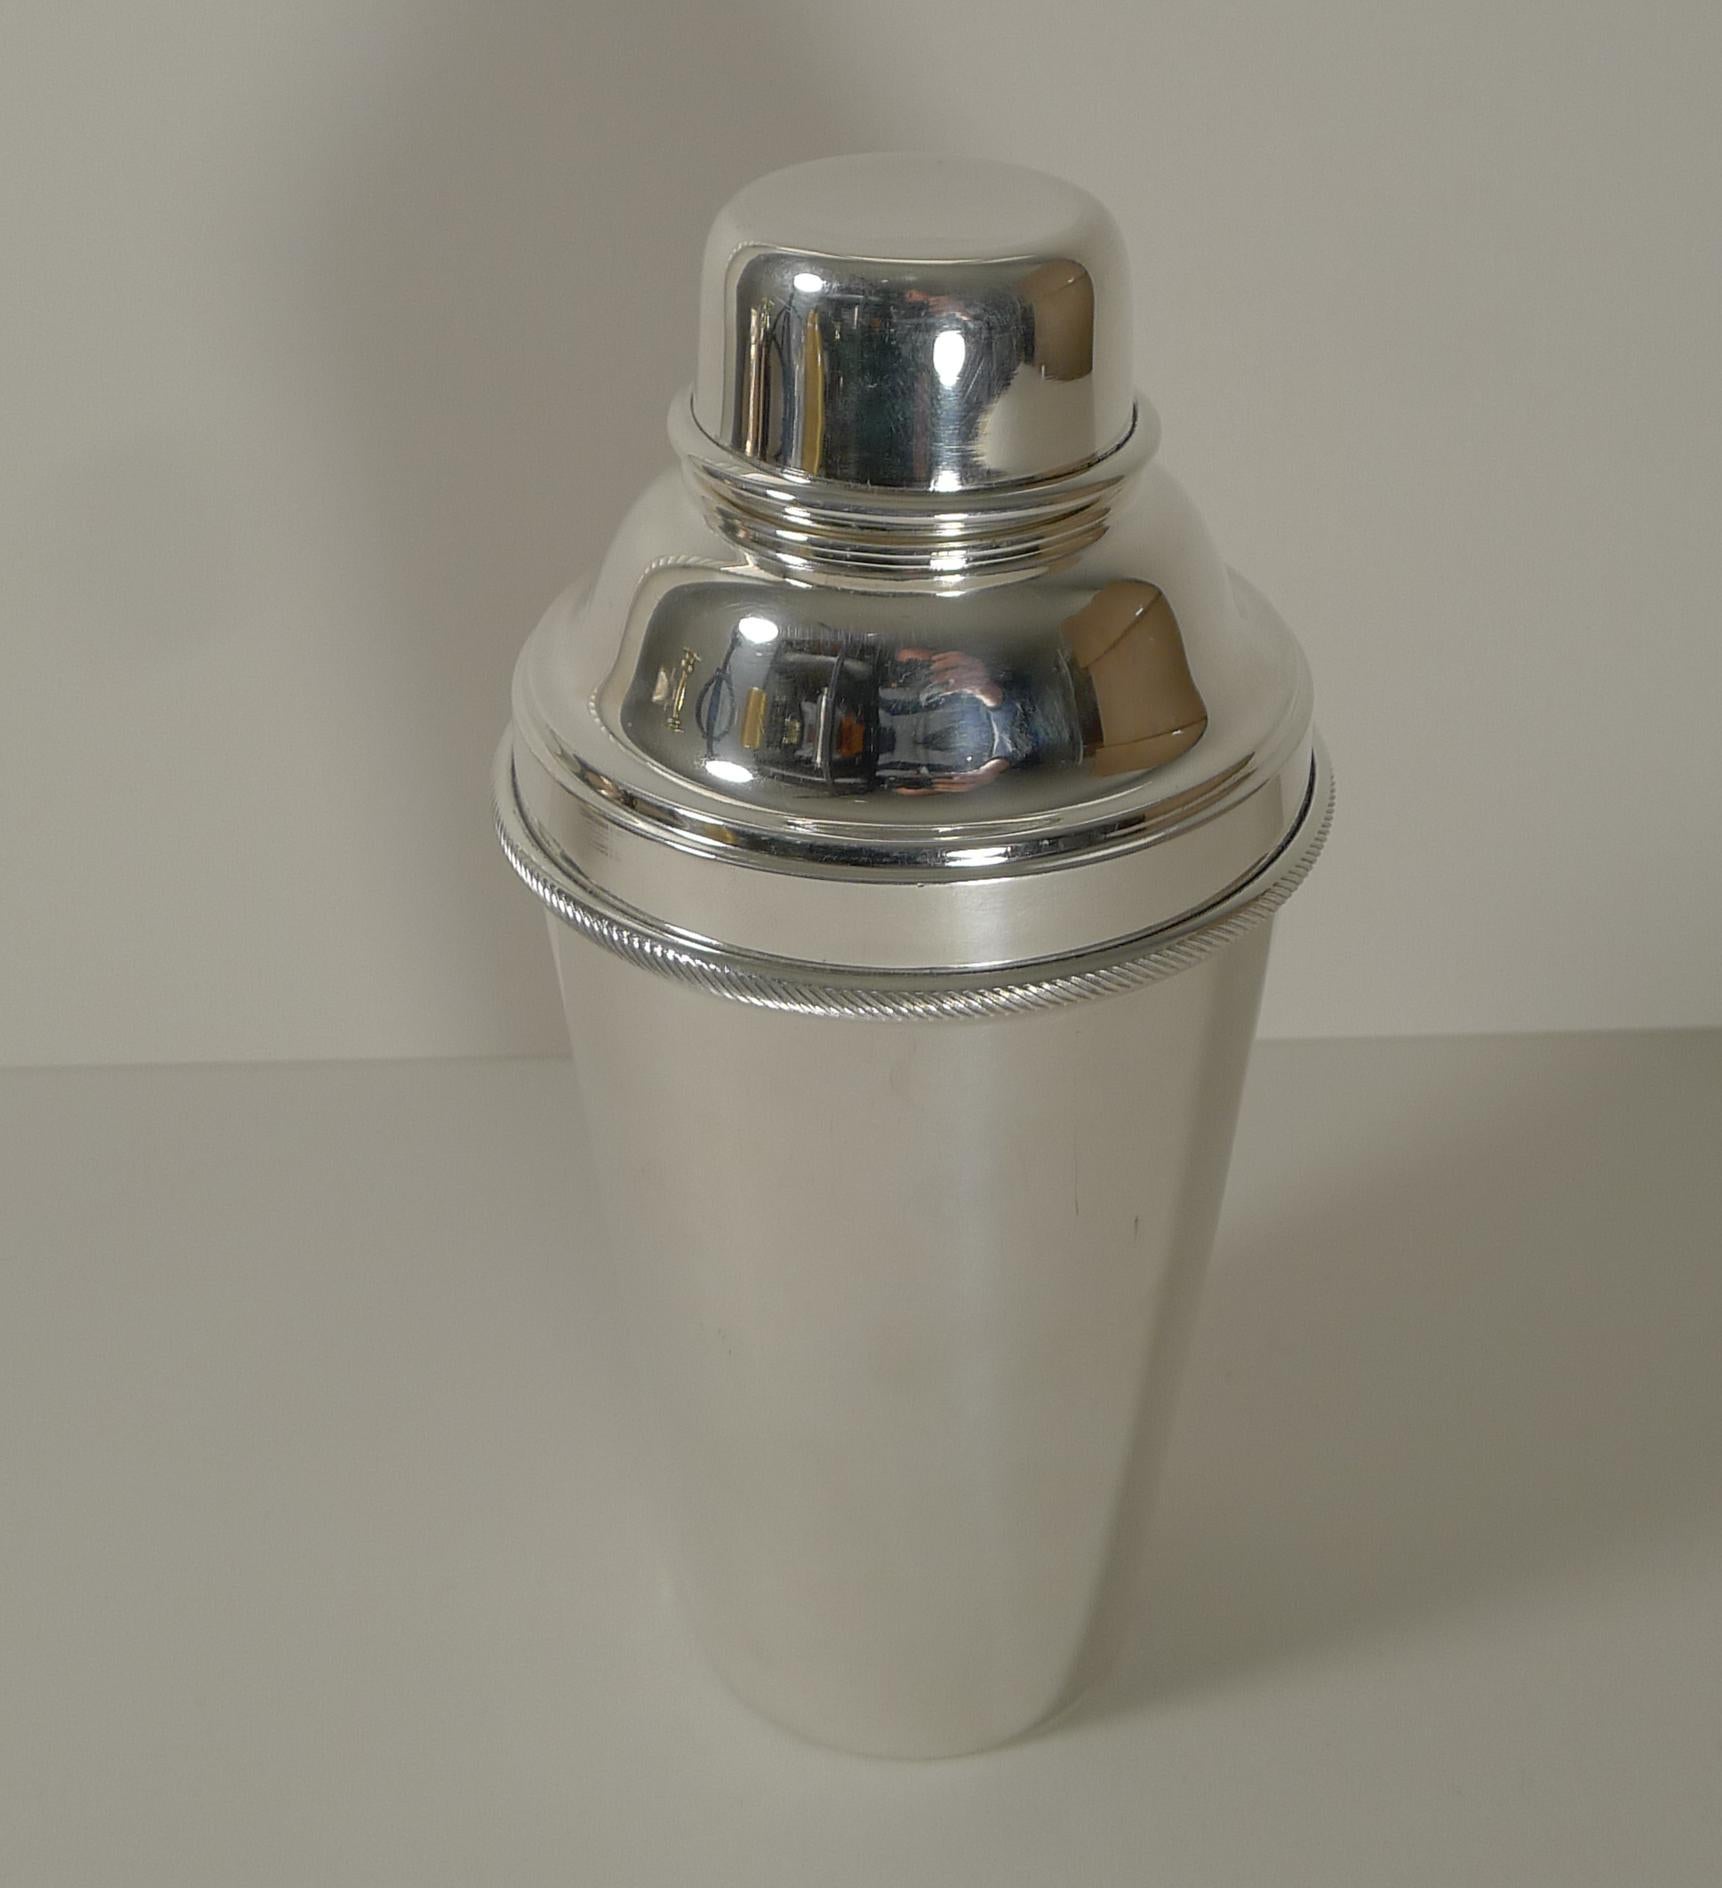 A lovely Art Deco silver plated cocktail shaker by well renowned silversmith, James Dixon and Sons. 

The top of the shaker reveals an integral ice breaker, always highly sought-after.

The underside is fully marked for James Dixon / Made In